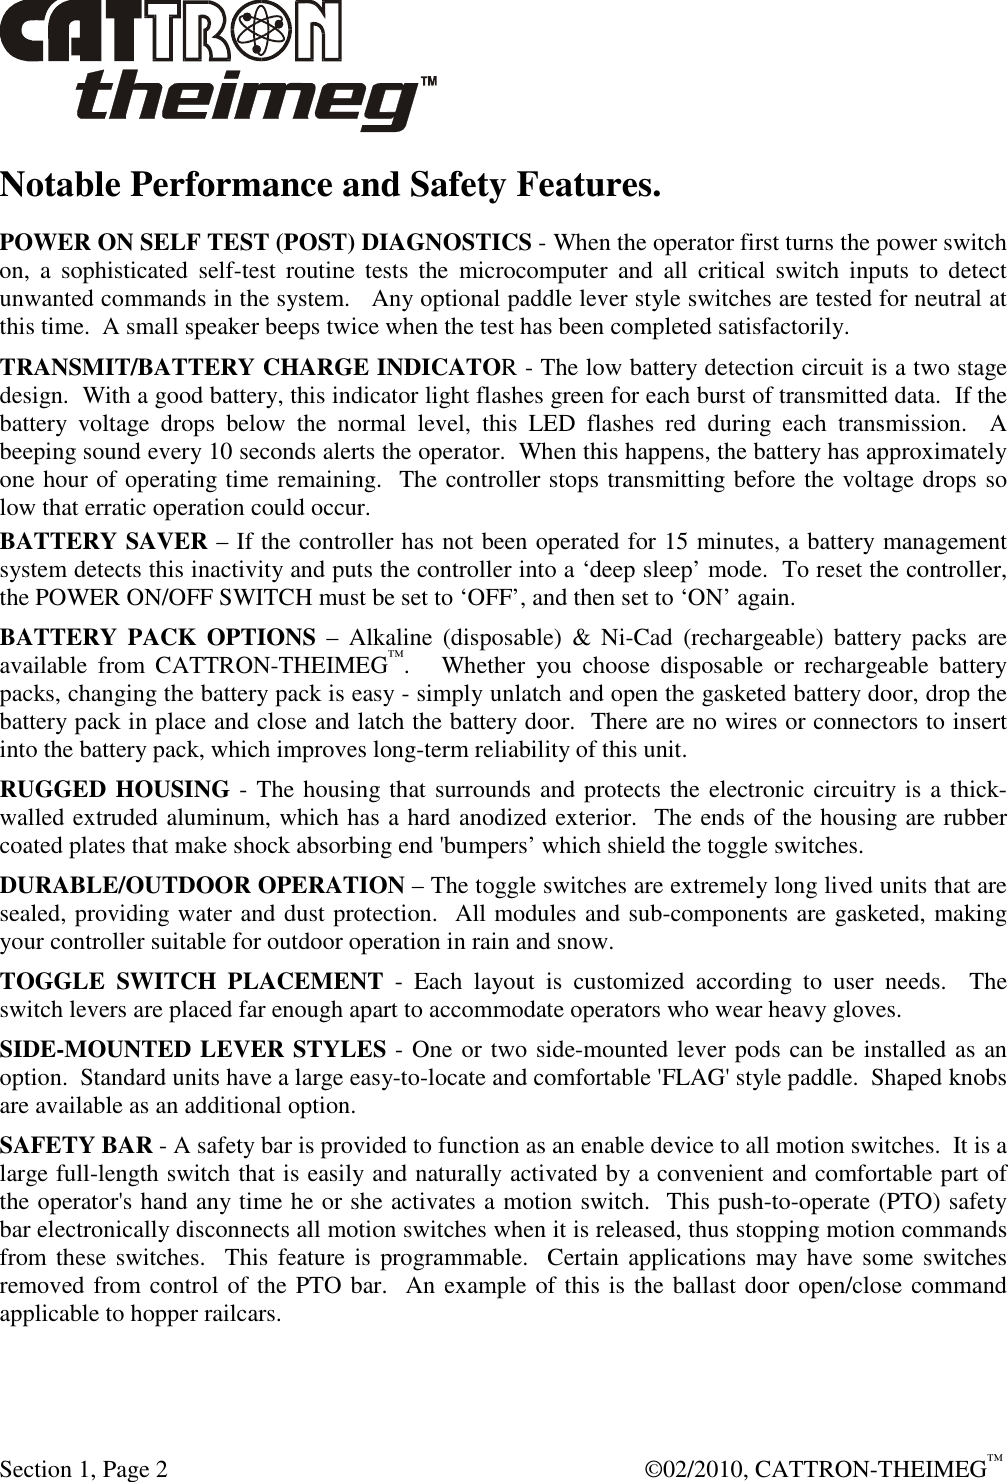  Section 1, Page 2    ©02/2010, CATTRON-THEIMEG™ Notable Performance and Safety Features. POWER ON SELF TEST (POST) DIAGNOSTICS - When the operator first turns the power switch on,  a  sophisticated  self-test  routine  tests  the  microcomputer  and  all  critical  switch  inputs  to  detect unwanted commands in the system.   Any optional paddle lever style switches are tested for neutral at this time.  A small speaker beeps twice when the test has been completed satisfactorily. TRANSMIT/BATTERY CHARGE INDICATOR - The low battery detection circuit is a two stage design.  With a good battery, this indicator light flashes green for each burst of transmitted data.  If the battery  voltage  drops  below  the  normal  level,  this  LED  flashes  red  during  each  transmission.    A beeping sound every 10 seconds alerts the operator.  When this happens, the battery has approximately one hour of operating time remaining.  The controller stops transmitting before the voltage drops so low that erratic operation could occur.   BATTERY SAVER – If the controller has not been operated for 15 minutes, a battery management system detects this inactivity and puts the controller into a ‘deep sleep’ mode.  To reset the controller, the POWER ON/OFF SWITCH must be set to ‘OFF’, and then set to ‘ON’ again. BATTERY  PACK  OPTIONS  –  Alkaline  (disposable)  &amp;  Ni-Cad  (rechargeable)  battery  packs  are available  from  CATTRON-THEIMEG™.      Whether  you  choose  disposable  or  rechargeable  battery packs, changing the battery pack is easy - simply unlatch and open the gasketed battery door, drop the battery pack in place and close and latch the battery door.  There are no wires or connectors to insert into the battery pack, which improves long-term reliability of this unit. RUGGED HOUSING - The housing that surrounds and protects the electronic circuitry is a thick-walled extruded aluminum, which has a hard anodized exterior.  The ends of the housing are rubber coated plates that make shock absorbing end &apos;bumpers’ which shield the toggle switches. DURABLE/OUTDOOR OPERATION – The toggle switches are extremely long lived units that are sealed, providing water and dust protection.  All modules and sub-components are gasketed, making your controller suitable for outdoor operation in rain and snow. TOGGLE  SWITCH  PLACEMENT  -  Each  layout  is  customized  according  to  user  needs.    The switch levers are placed far enough apart to accommodate operators who wear heavy gloves. SIDE-MOUNTED LEVER STYLES - One or two side-mounted lever pods can be installed as an option.  Standard units have a large easy-to-locate and comfortable &apos;FLAG&apos; style paddle.  Shaped knobs are available as an additional option. SAFETY BAR - A safety bar is provided to function as an enable device to all motion switches.  It is a large full-length switch that is easily and naturally activated by a convenient and comfortable part of the operator&apos;s hand any time he or she activates a motion switch.  This push-to-operate (PTO) safety bar electronically disconnects all motion switches when it is released, thus stopping motion commands from these switches.    This feature is  programmable.  Certain applications  may have some switches removed from control of the PTO bar.  An example of this is the ballast door open/close command applicable to hopper railcars.   